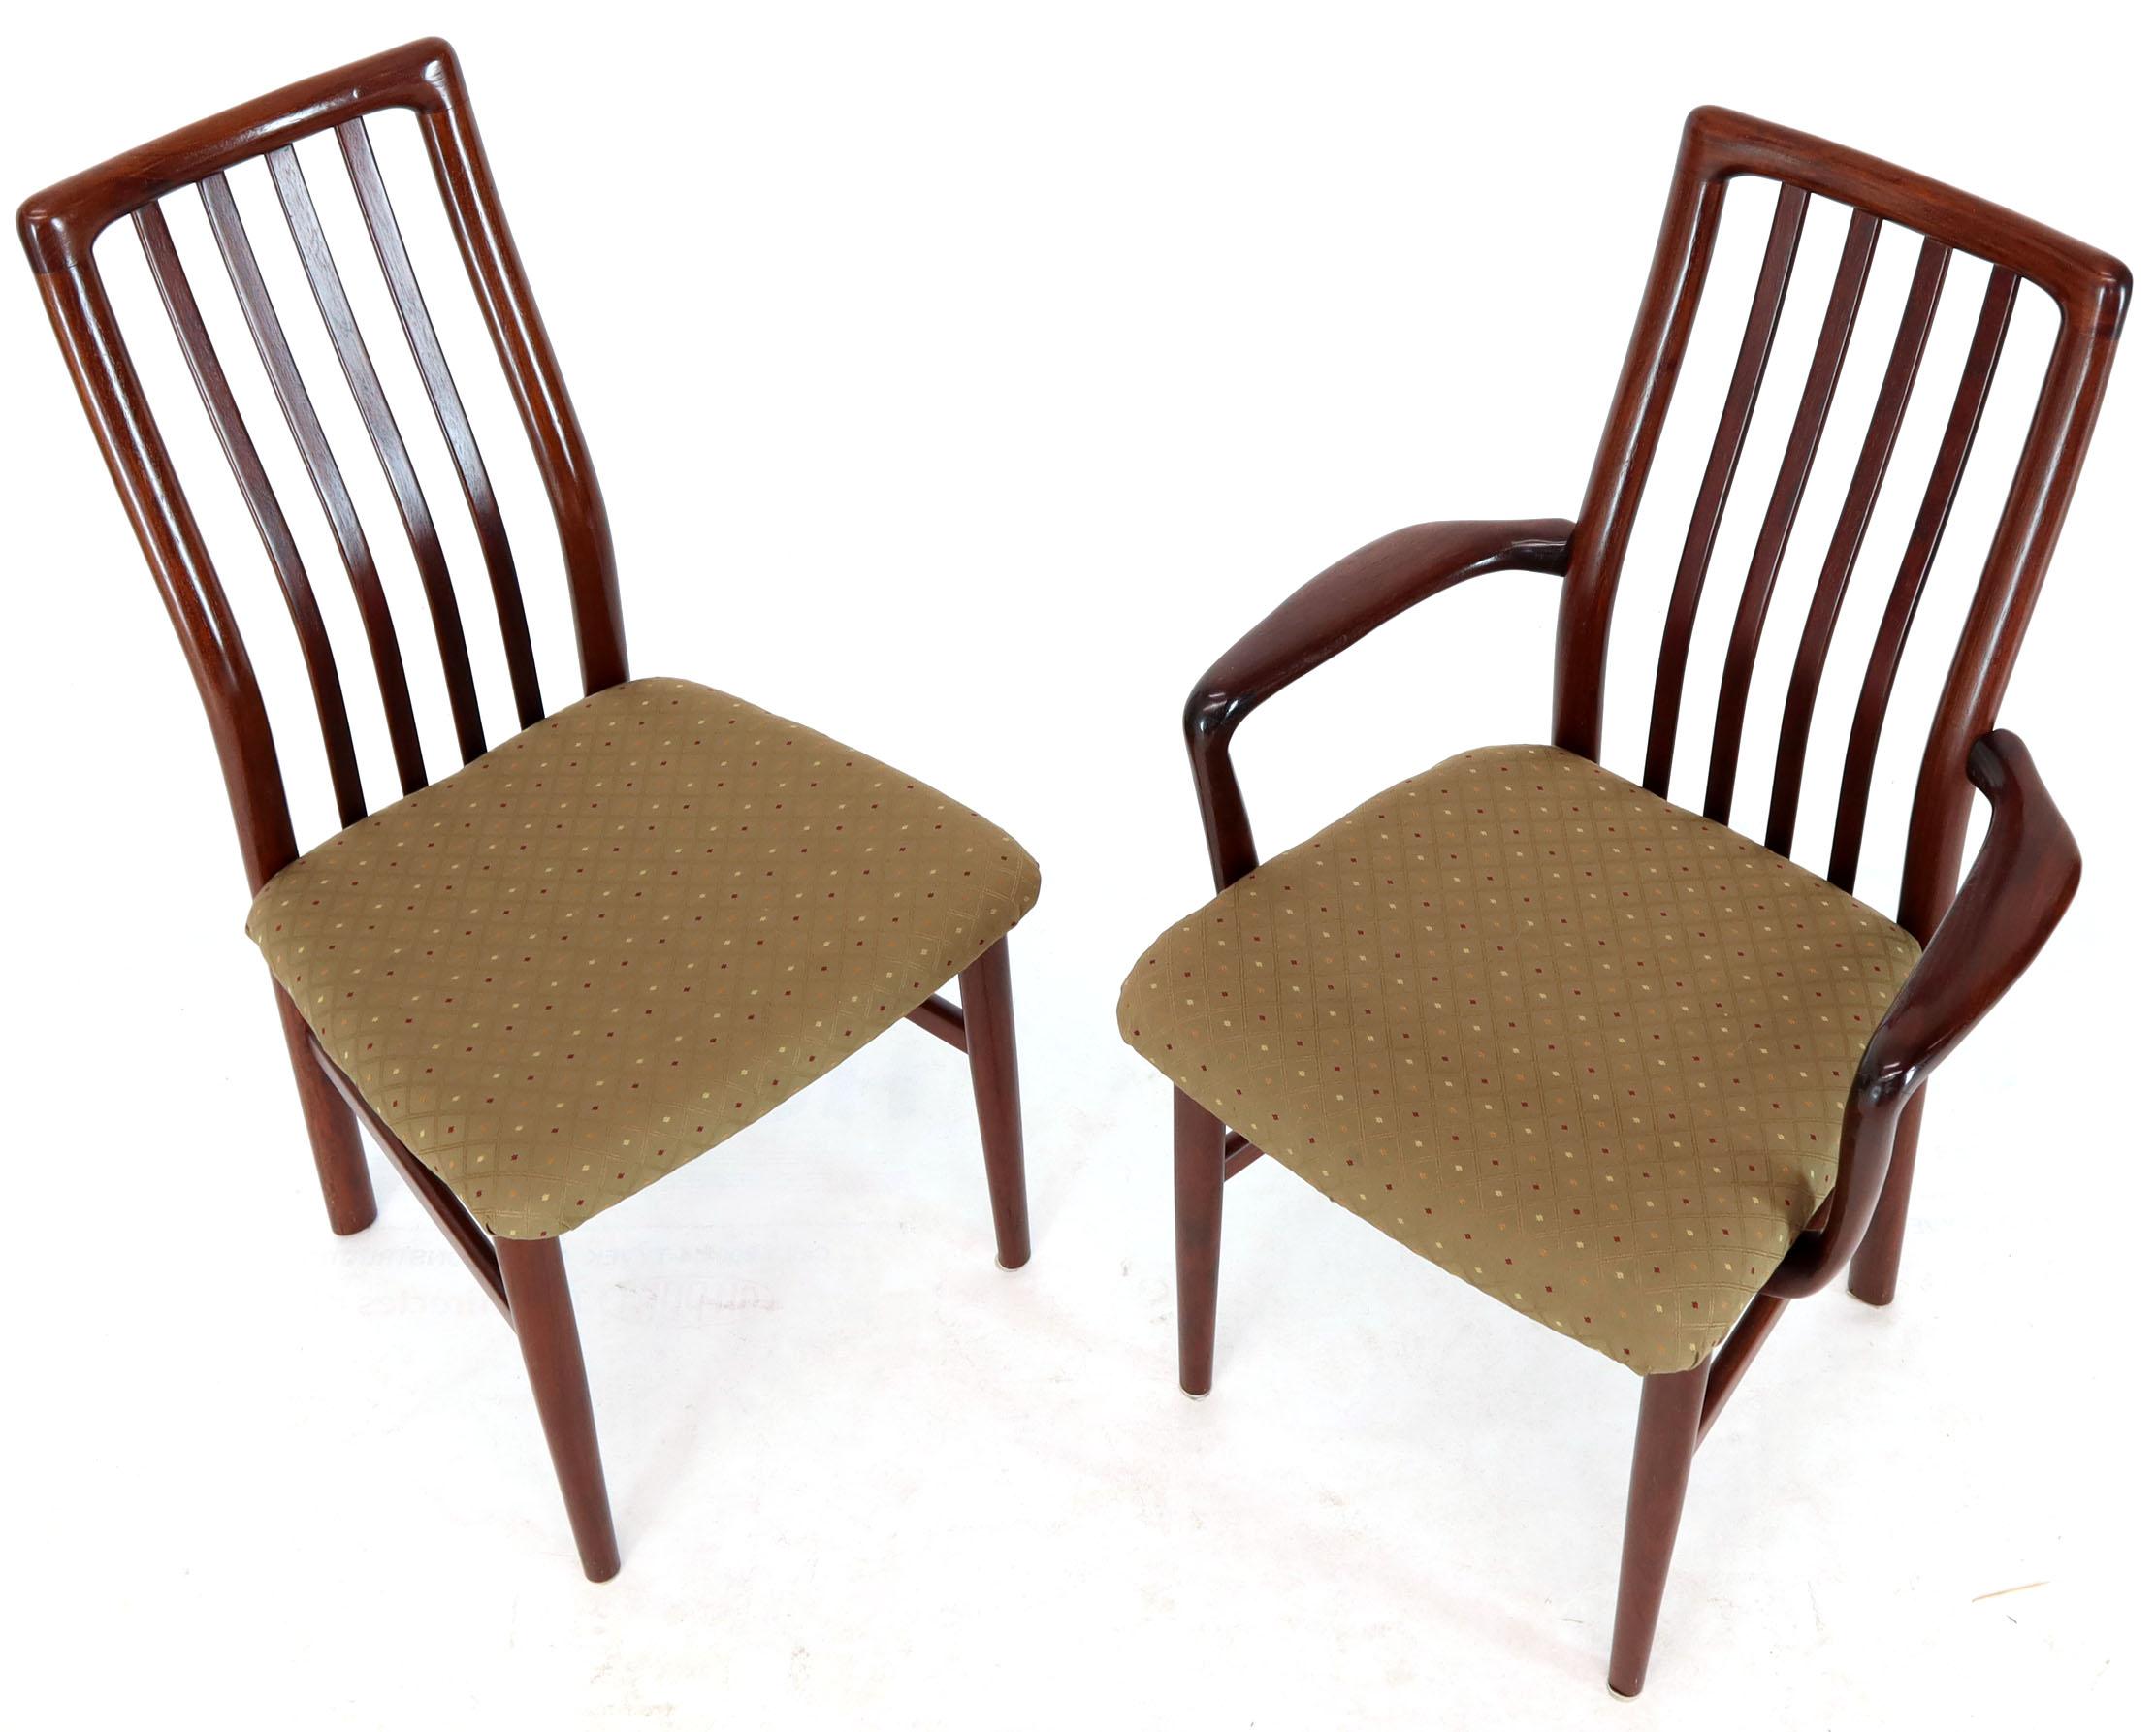 Lacquered Set of 6 Danish Mid-Century Modern Rosewood Dining Chairs Two Armchairs